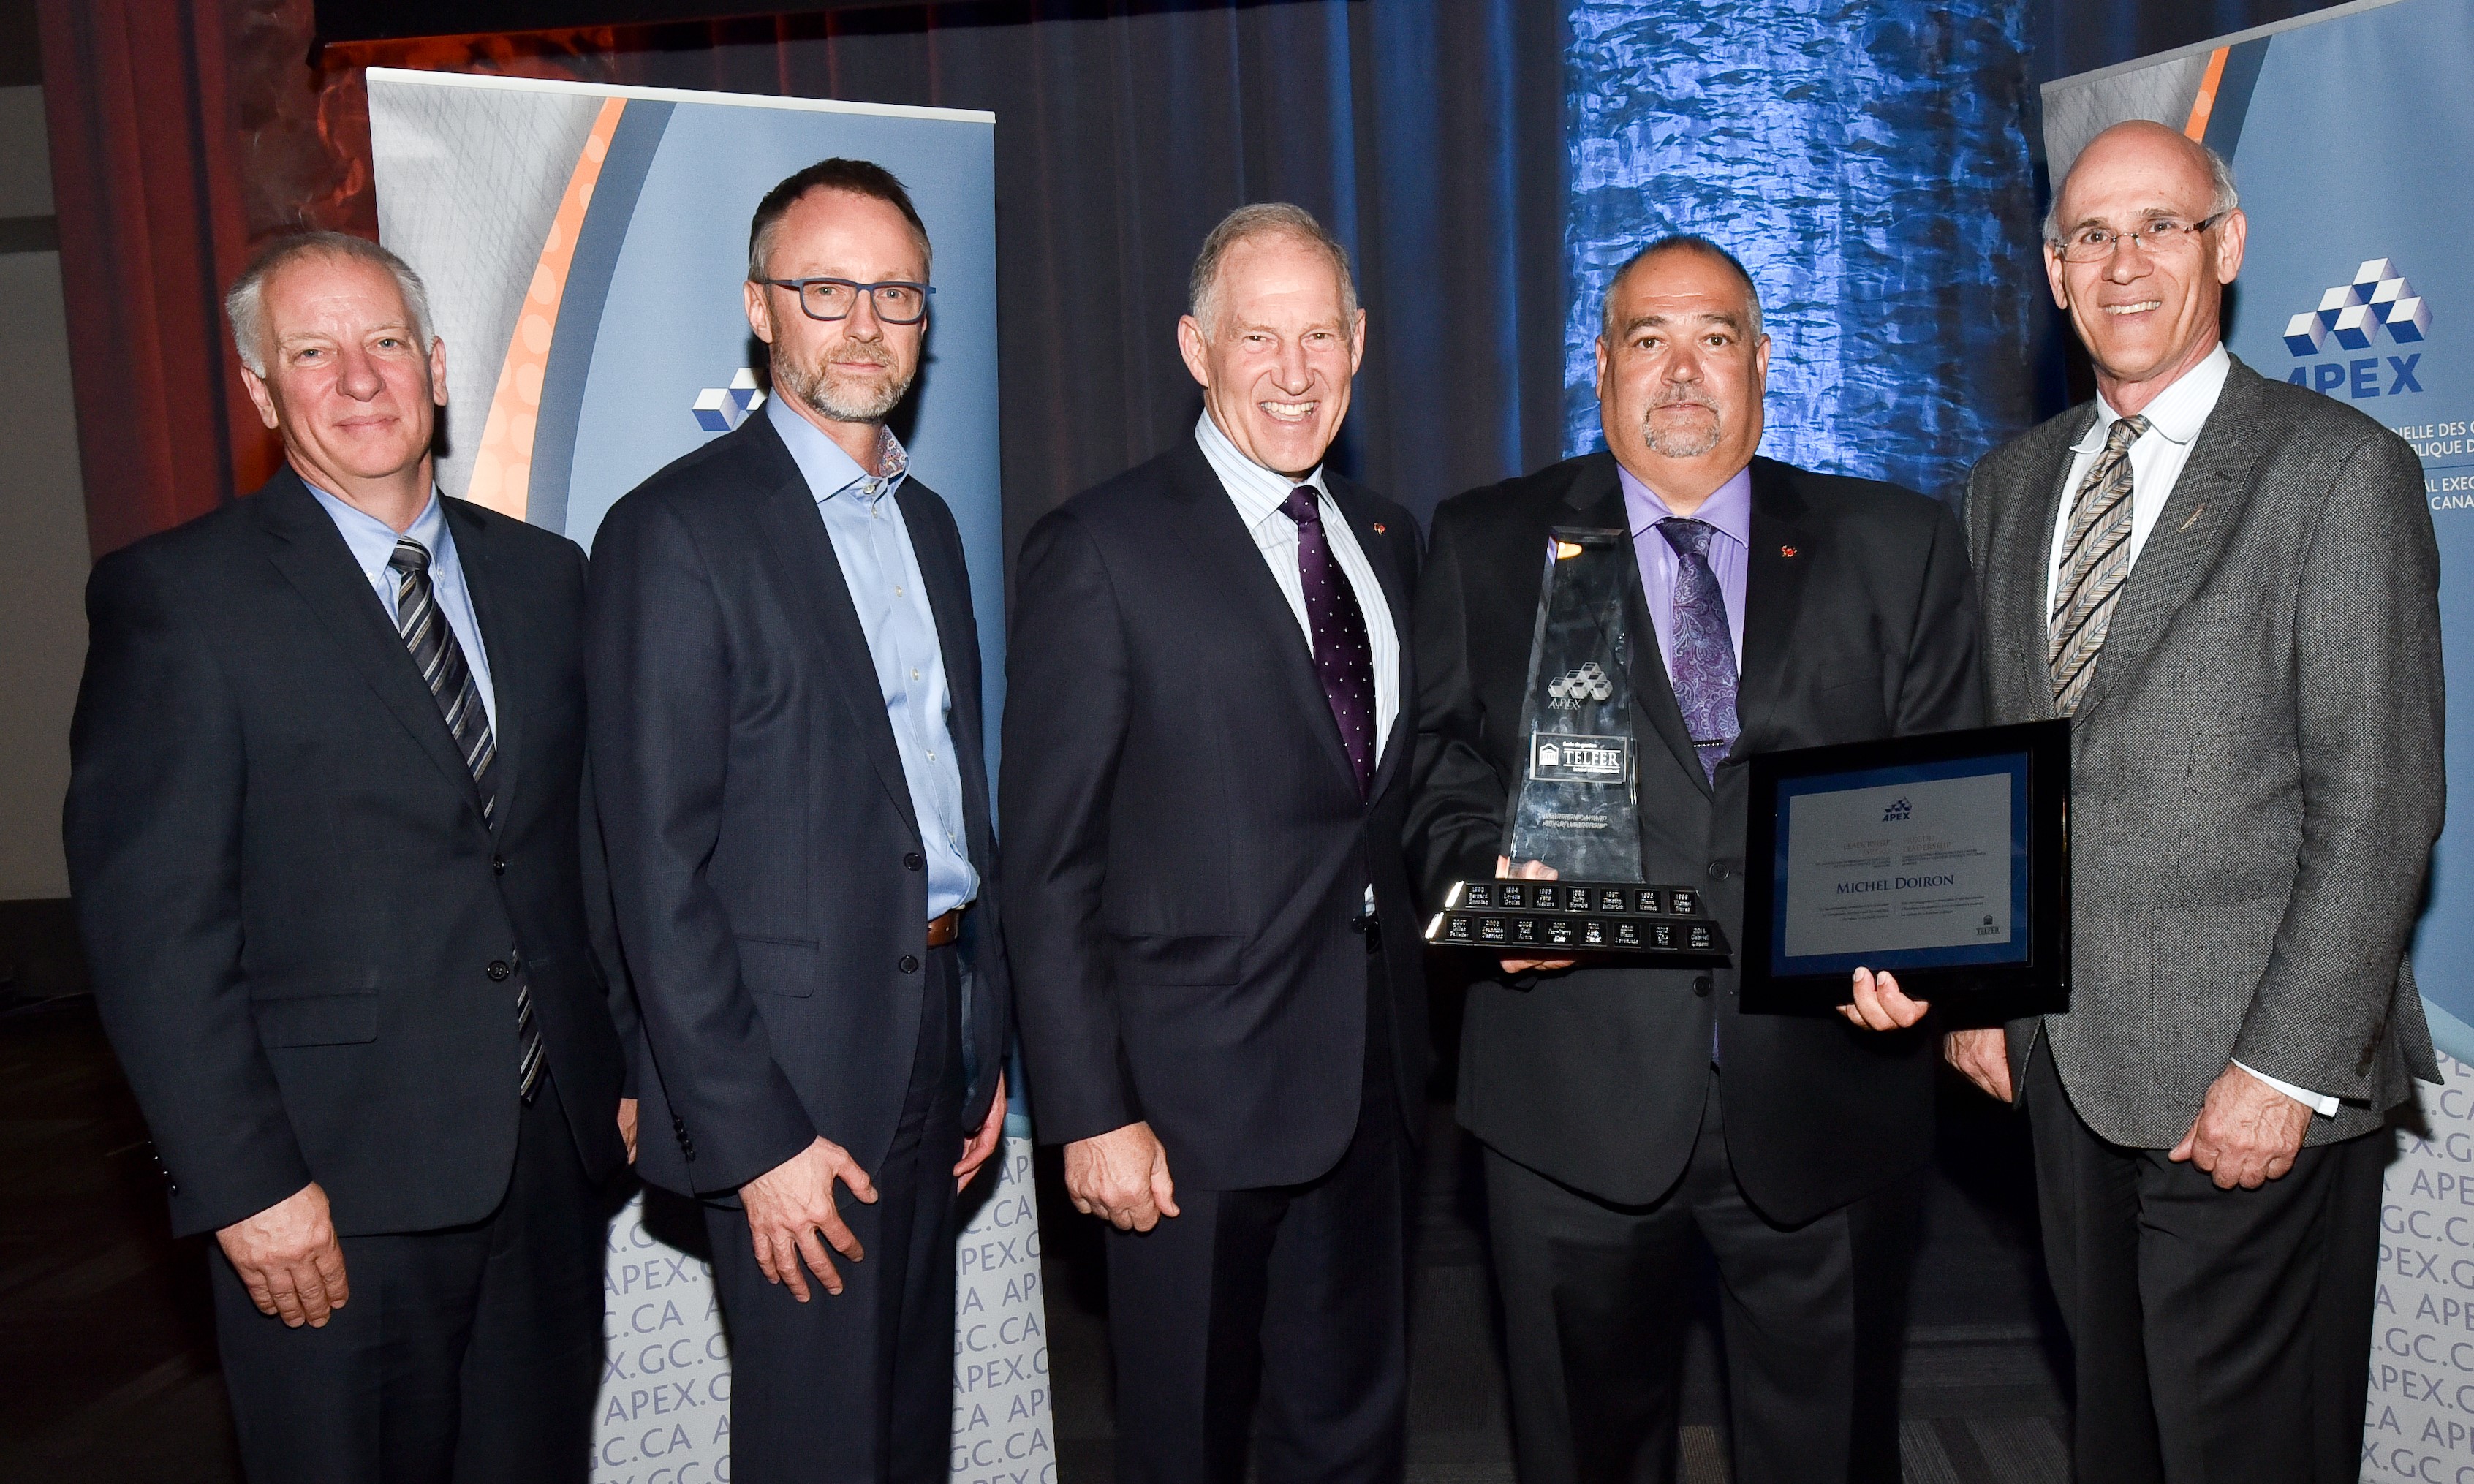 Michel Doiron, ADM at Veterans - winner of the APEX Award of Excellence in Leadership - sponsored by Telfer